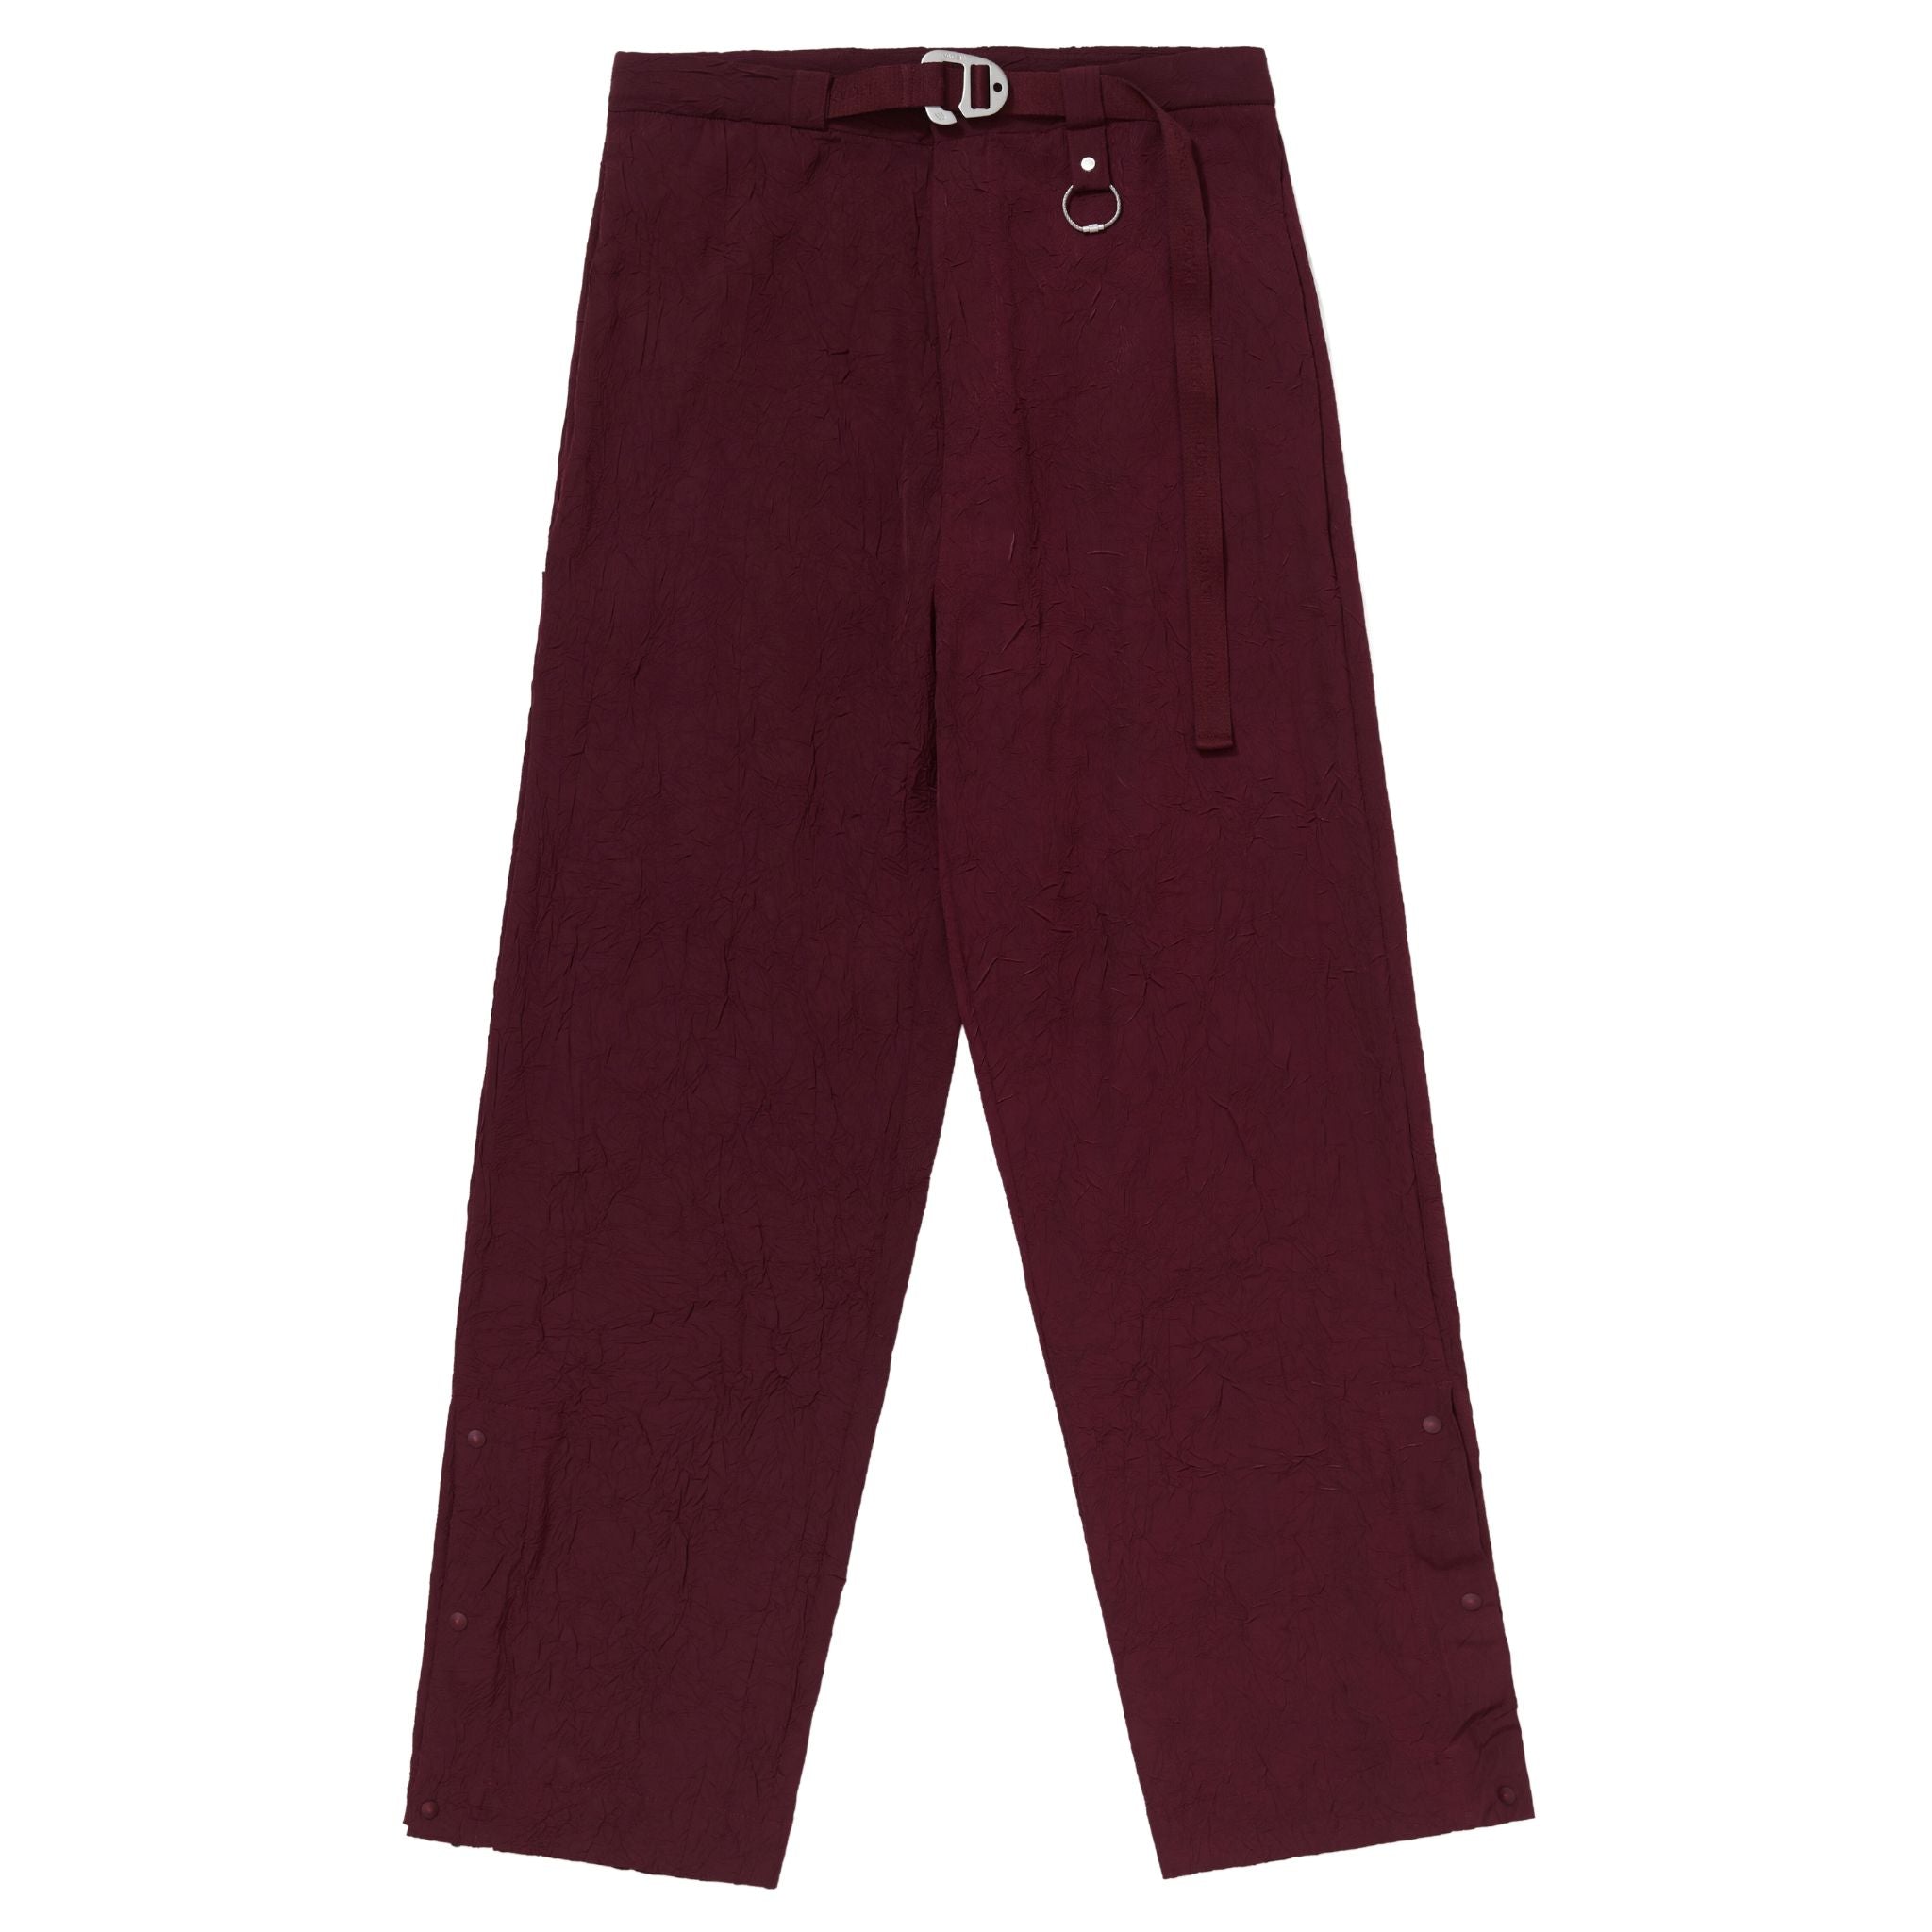 PACE - Shiwa Trousers "Burgundy" - THE GAME